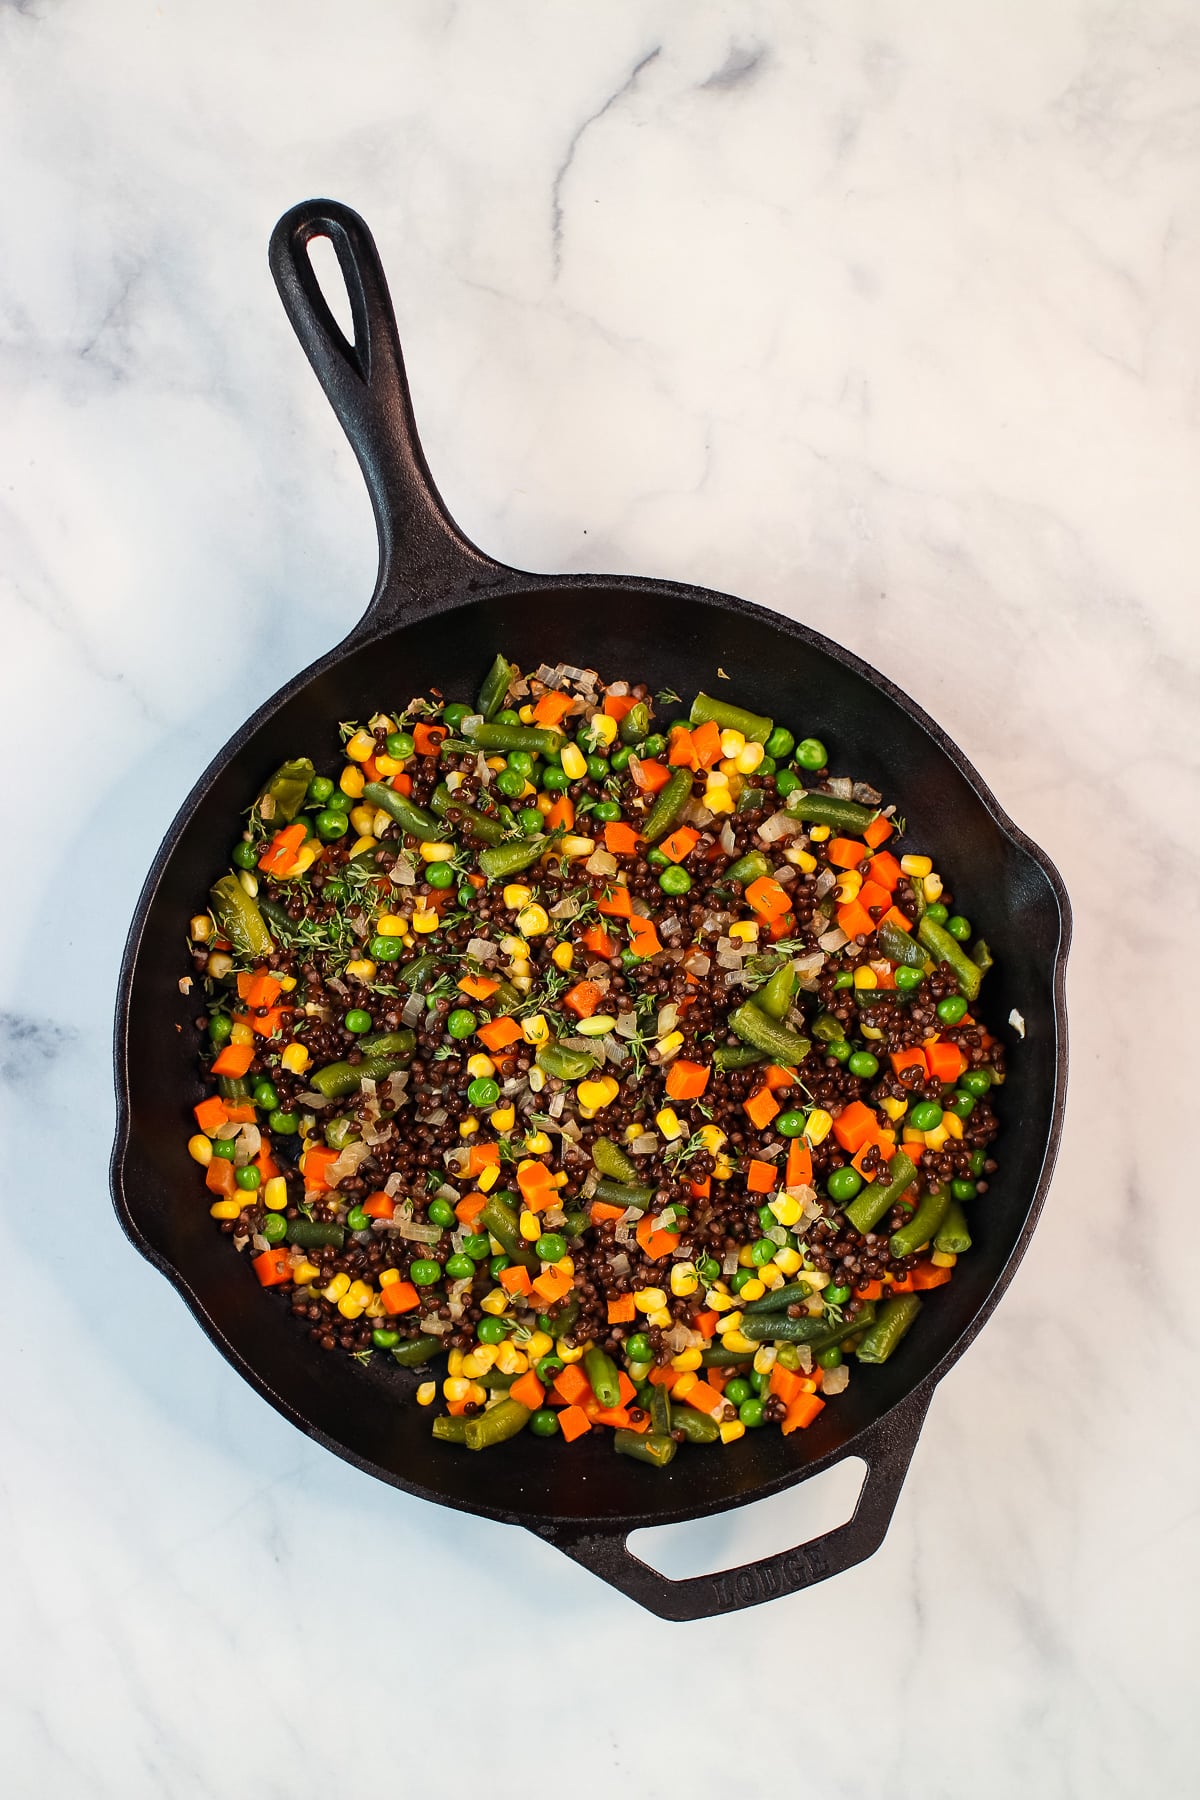 Mixed vegetables, lentils and thyme in a cast iron skillet.